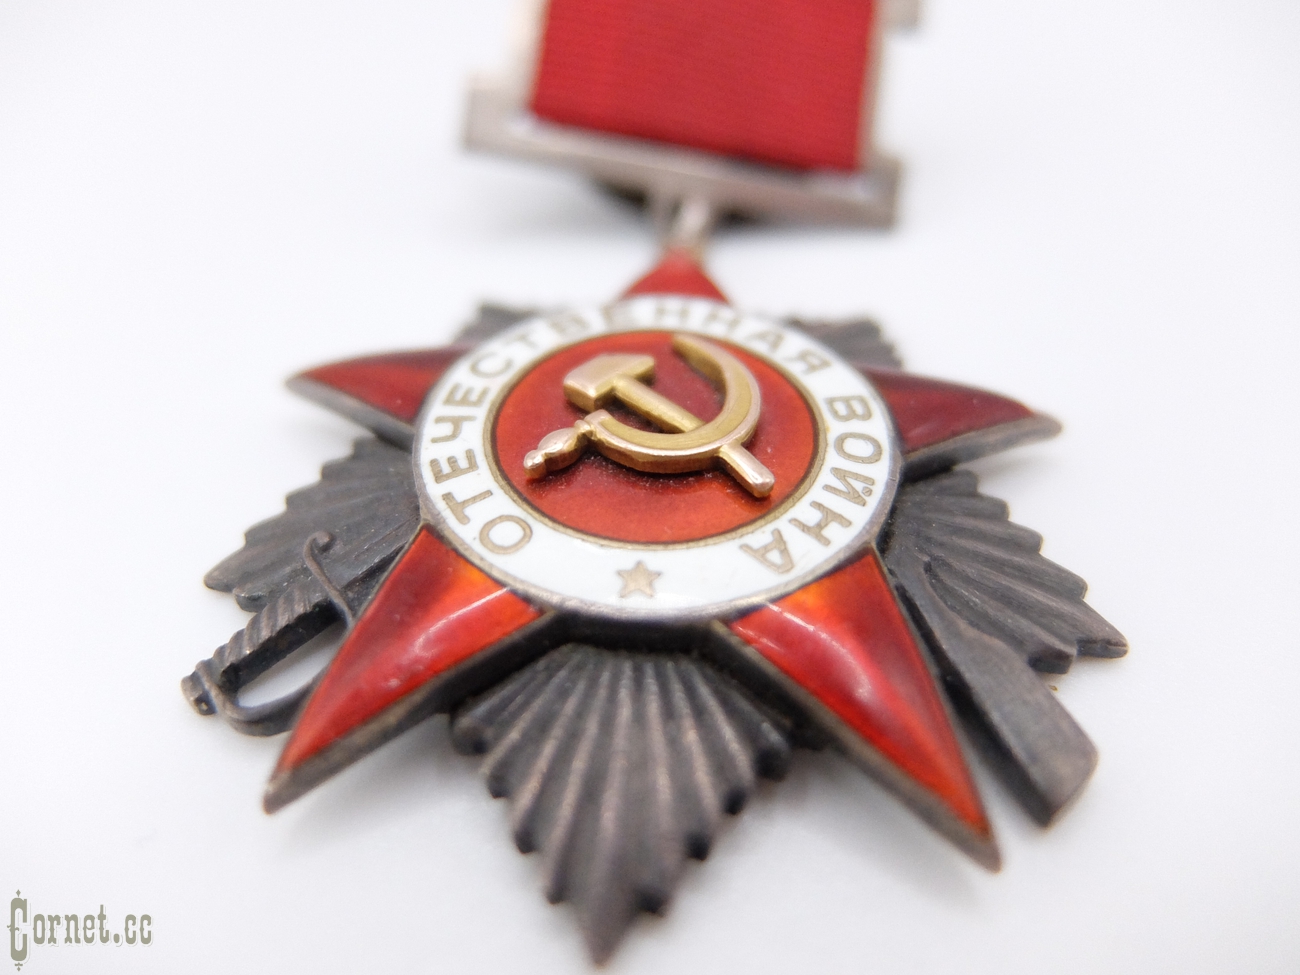 Order of the Great Patriotic War 2 class